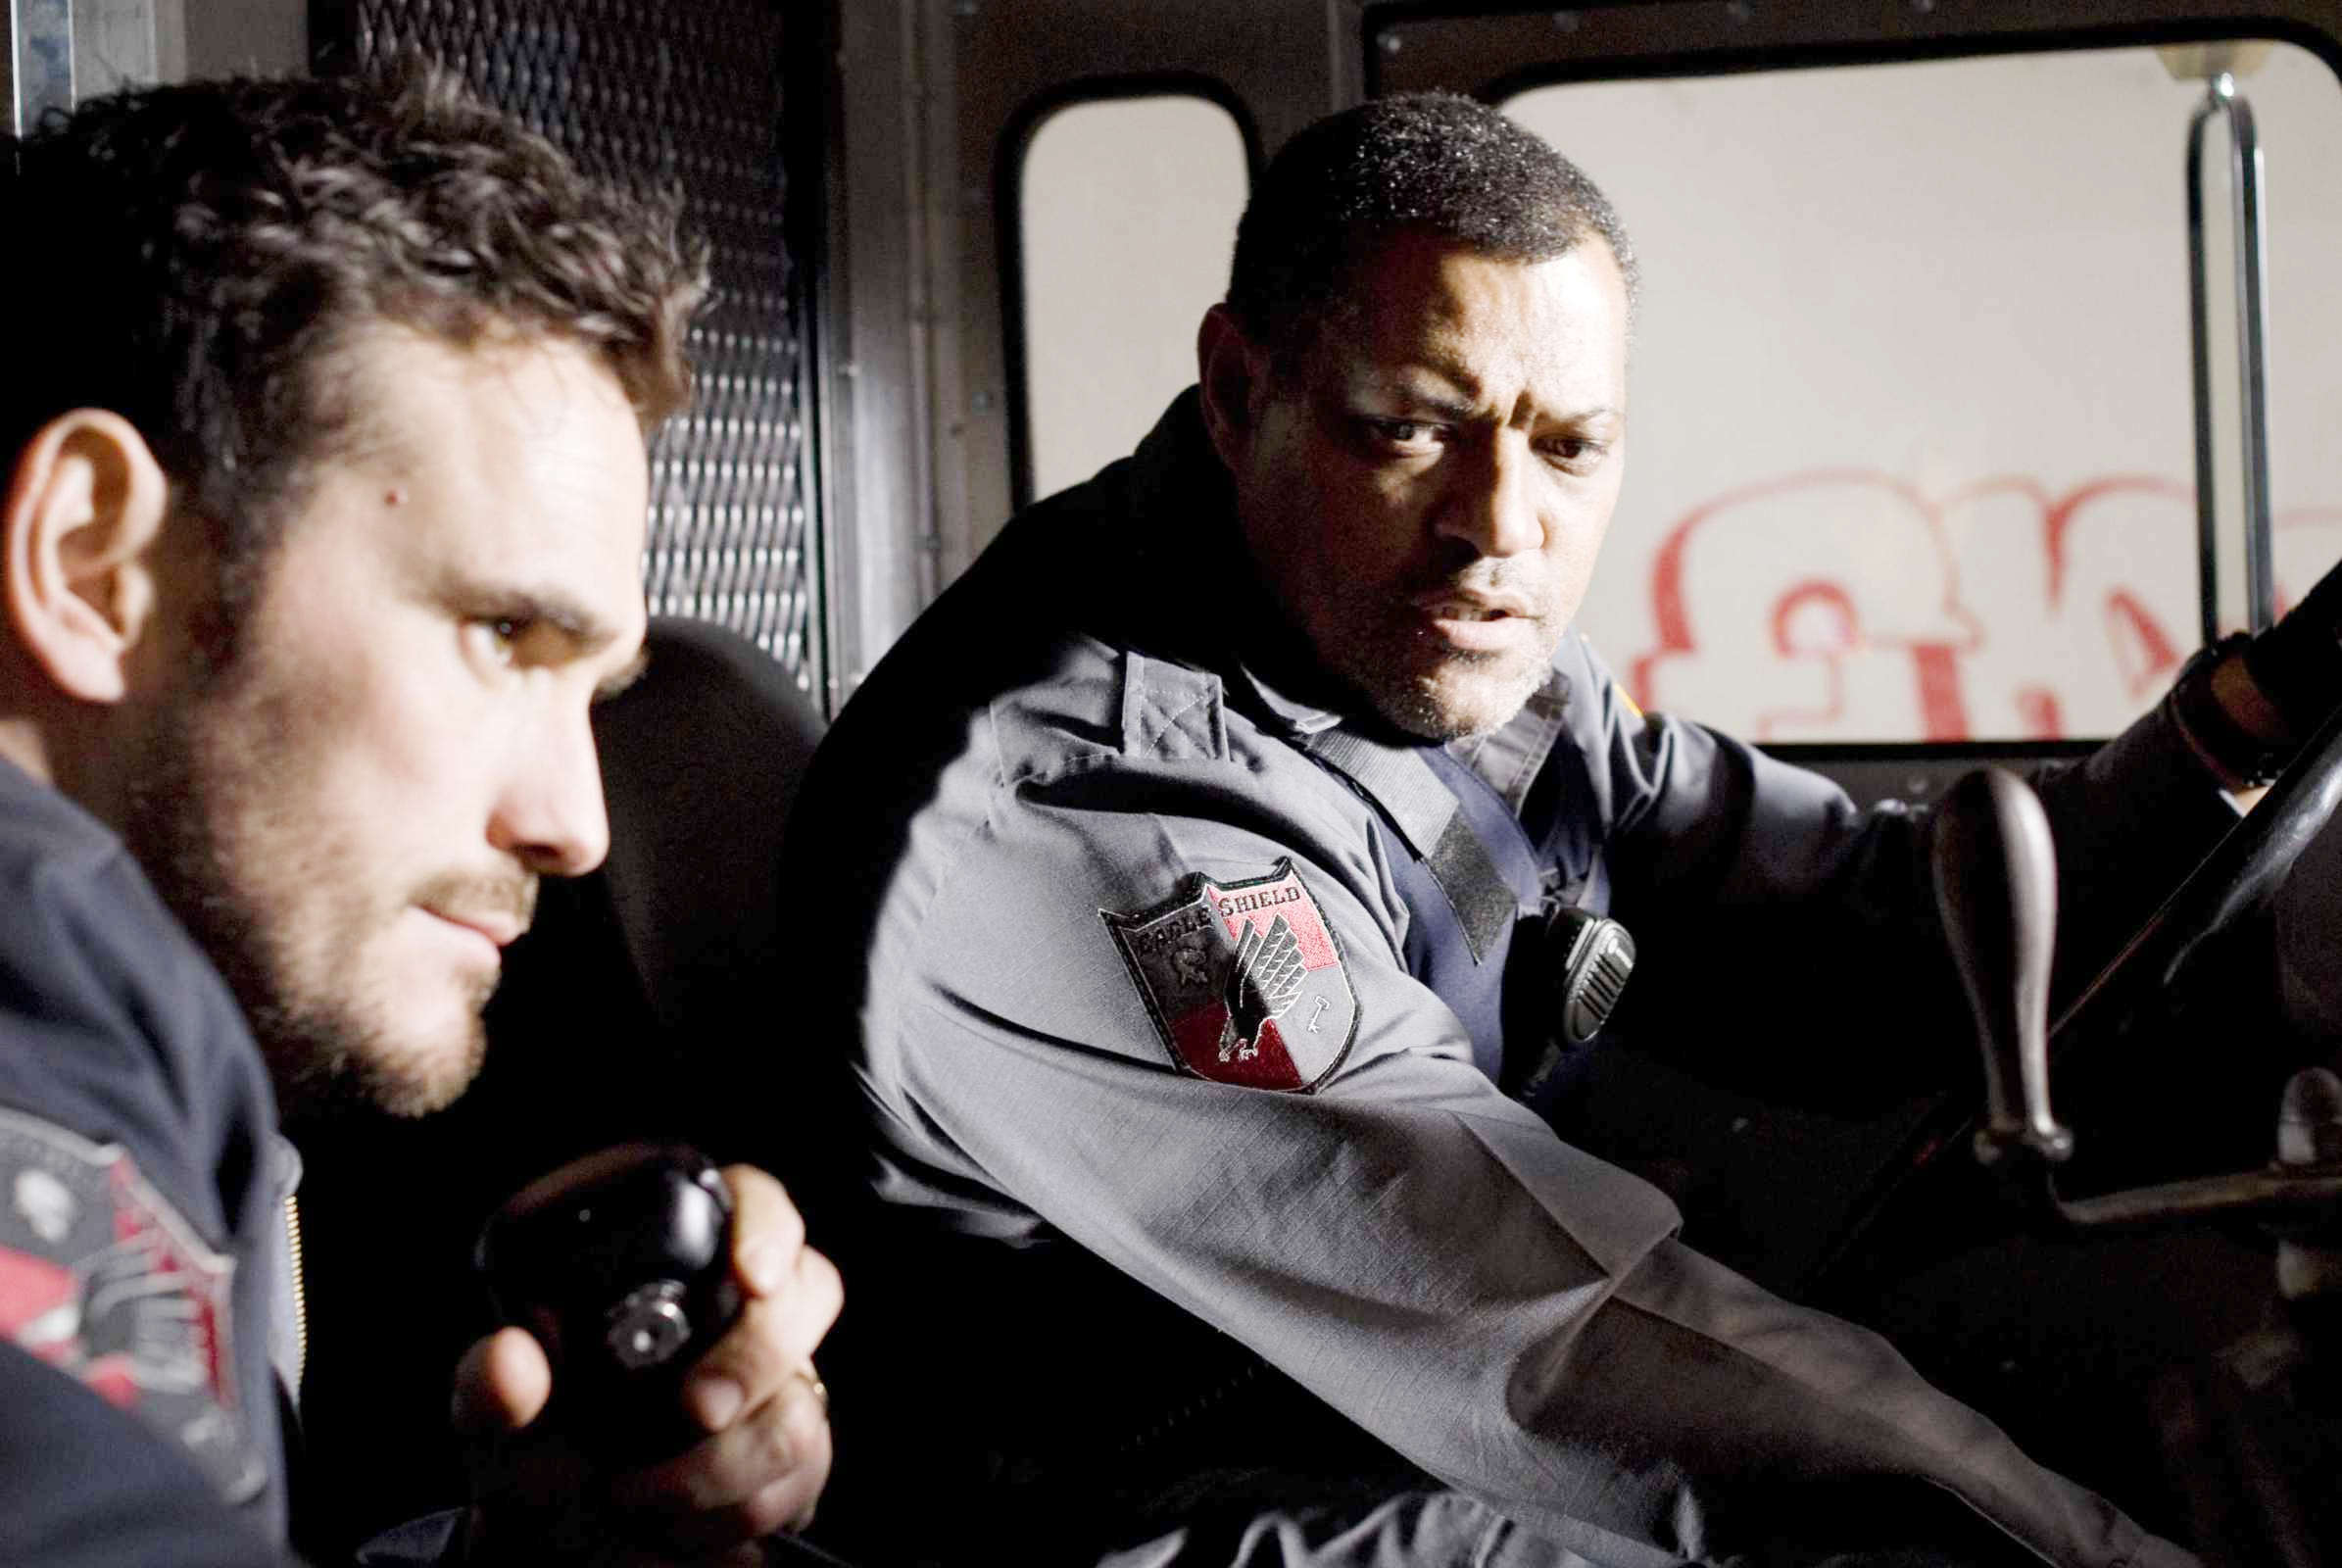 Matt Dillon stars as Mike Cochrone and Laurence Fishburne stars as Baines in Screen Gems' Armored (2009)